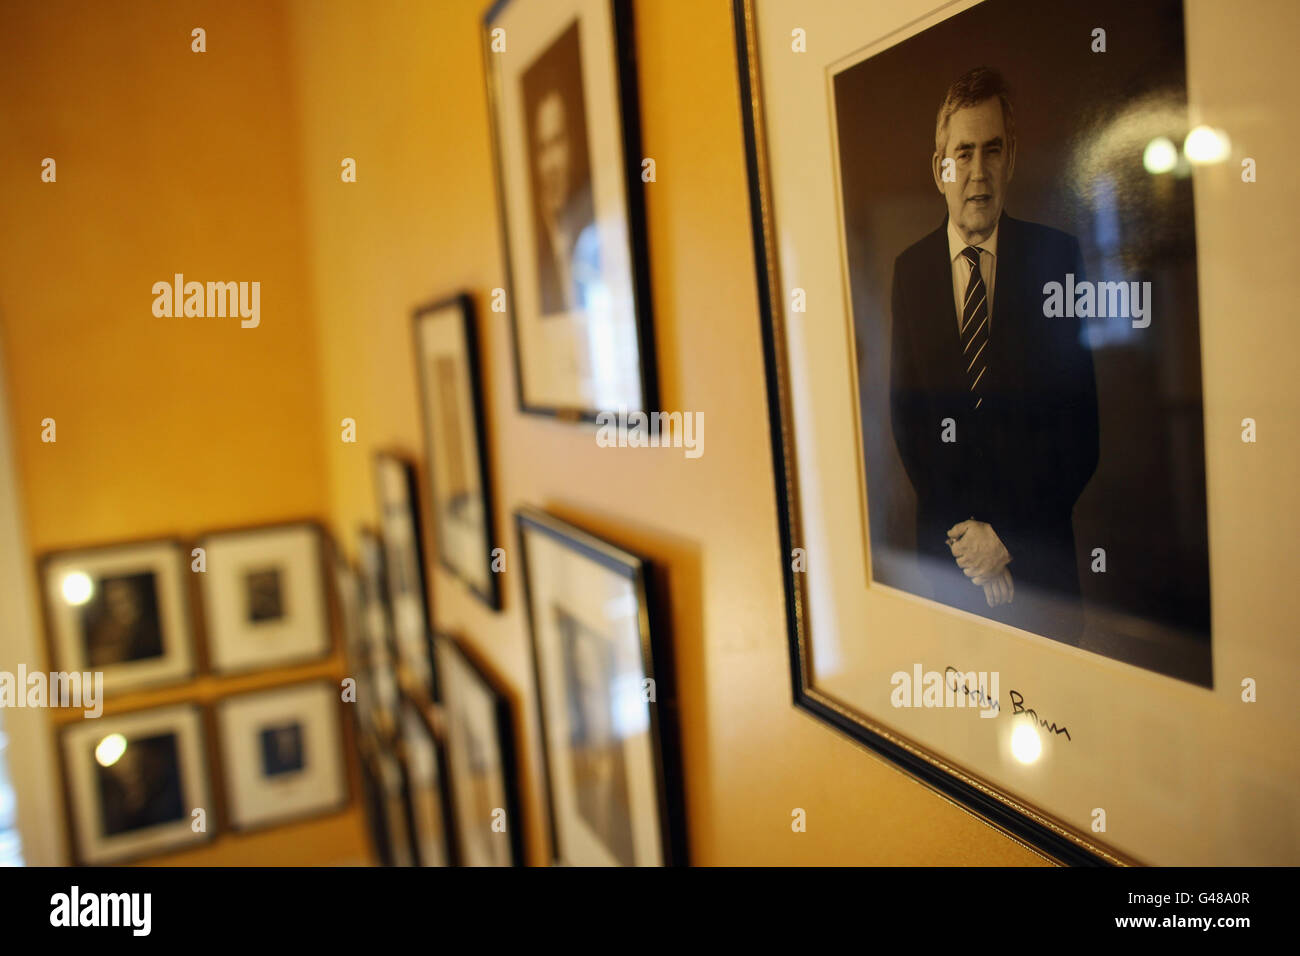 A photographic portrait of former British Prime Minister Gordon Brown hangs at Number 10 Downing Street in London, England. Stock Photo